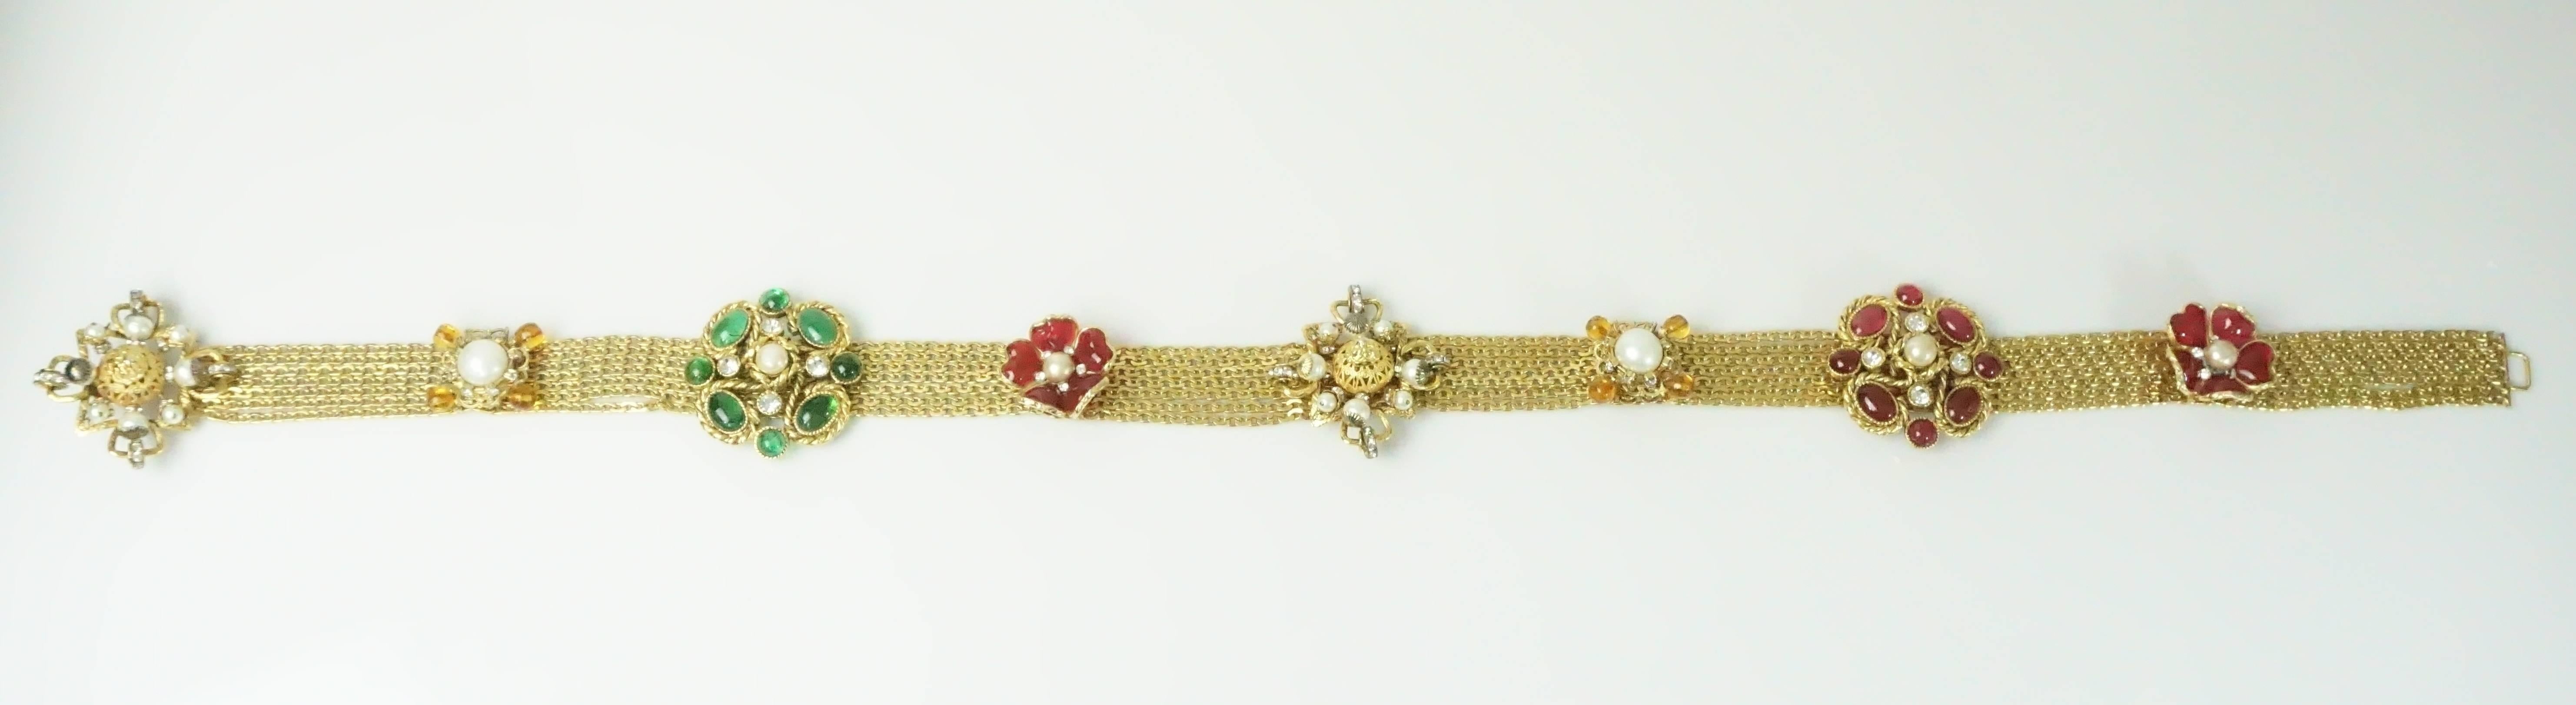 Chanel Gold Chain Link Belt/Necklace with Gripoix and Pearl Camelias-Circa 70's 3